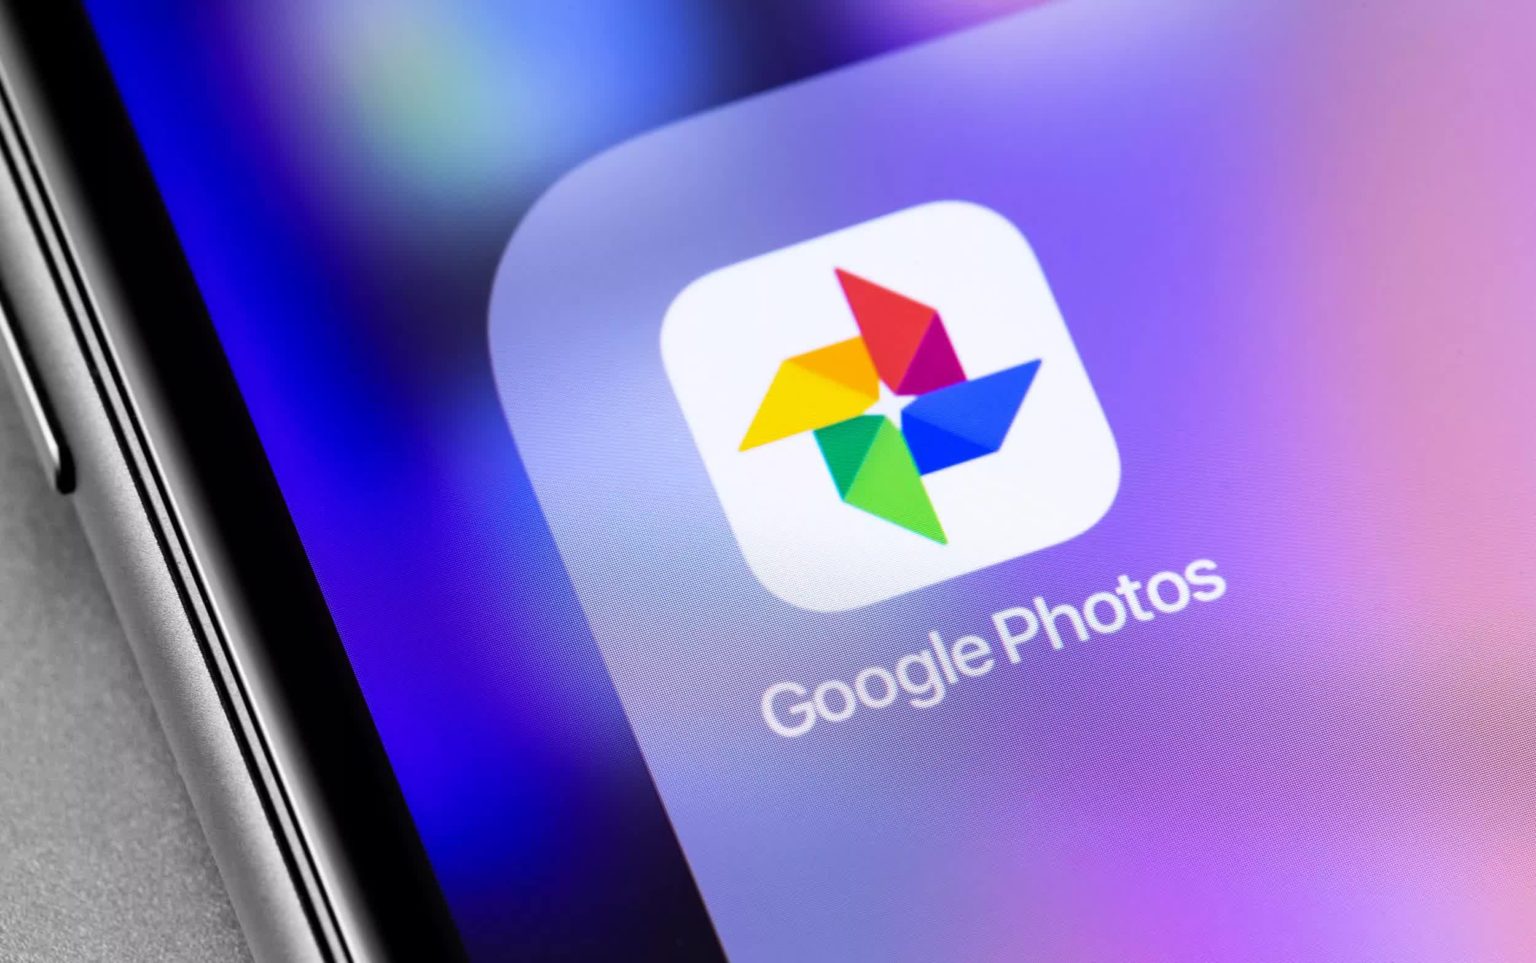 You can move your entire Google Photos library to iCloud with a few clicks using this new tool